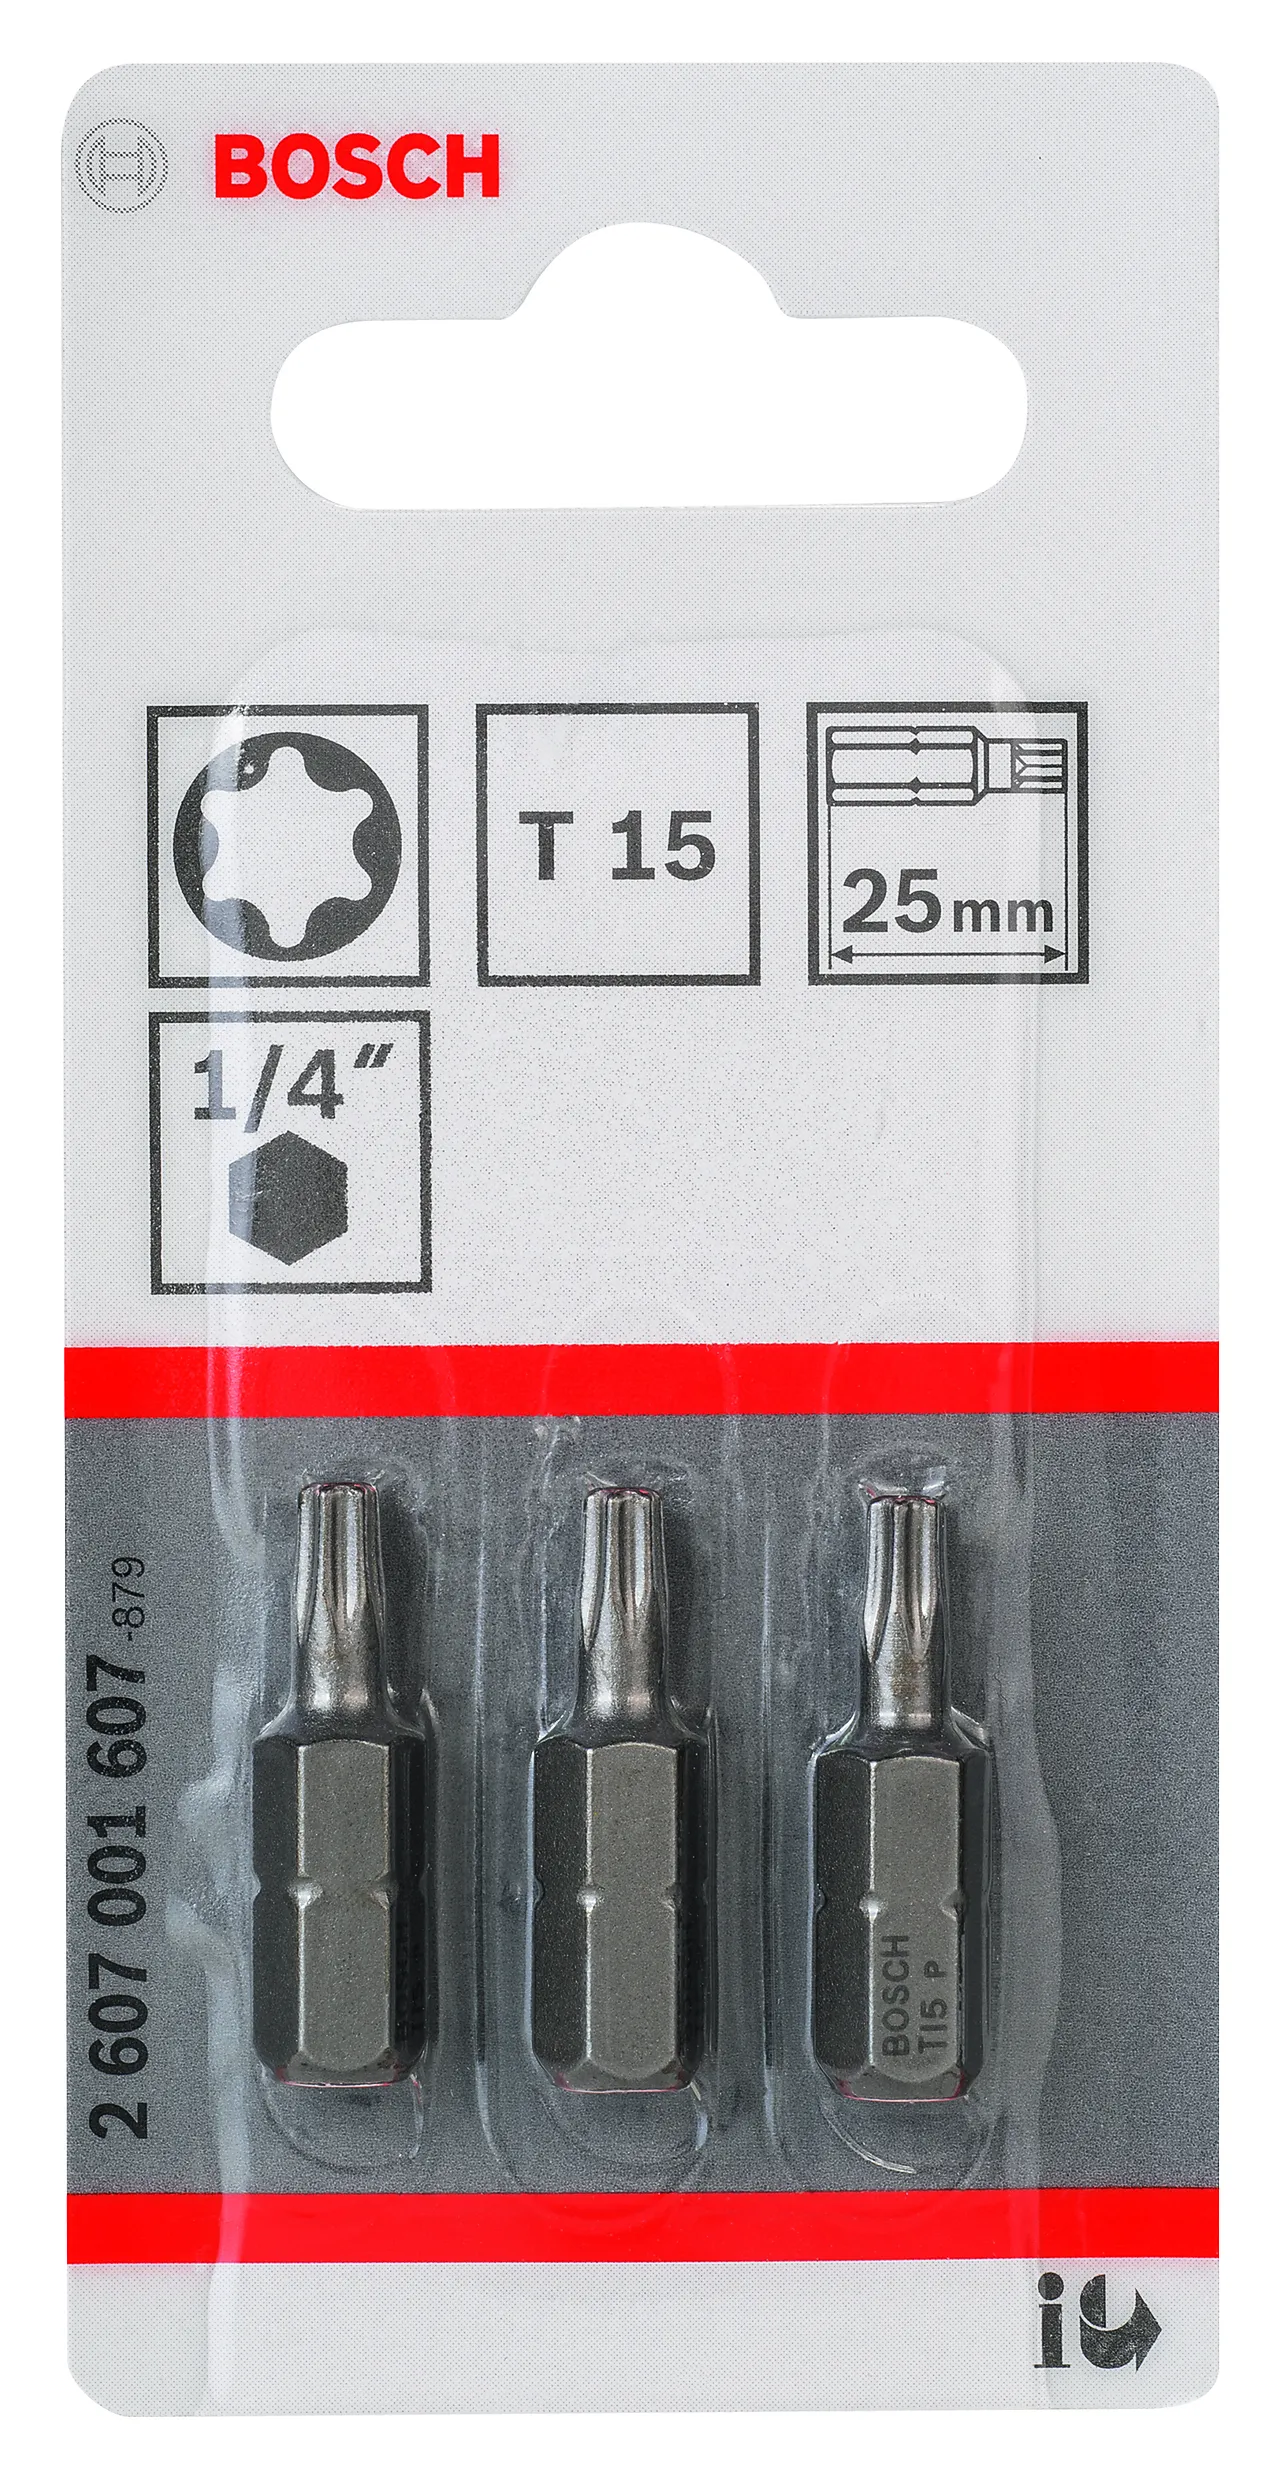 Bits-003 t15 25mm a3 null - null - 2 - Miniatyr